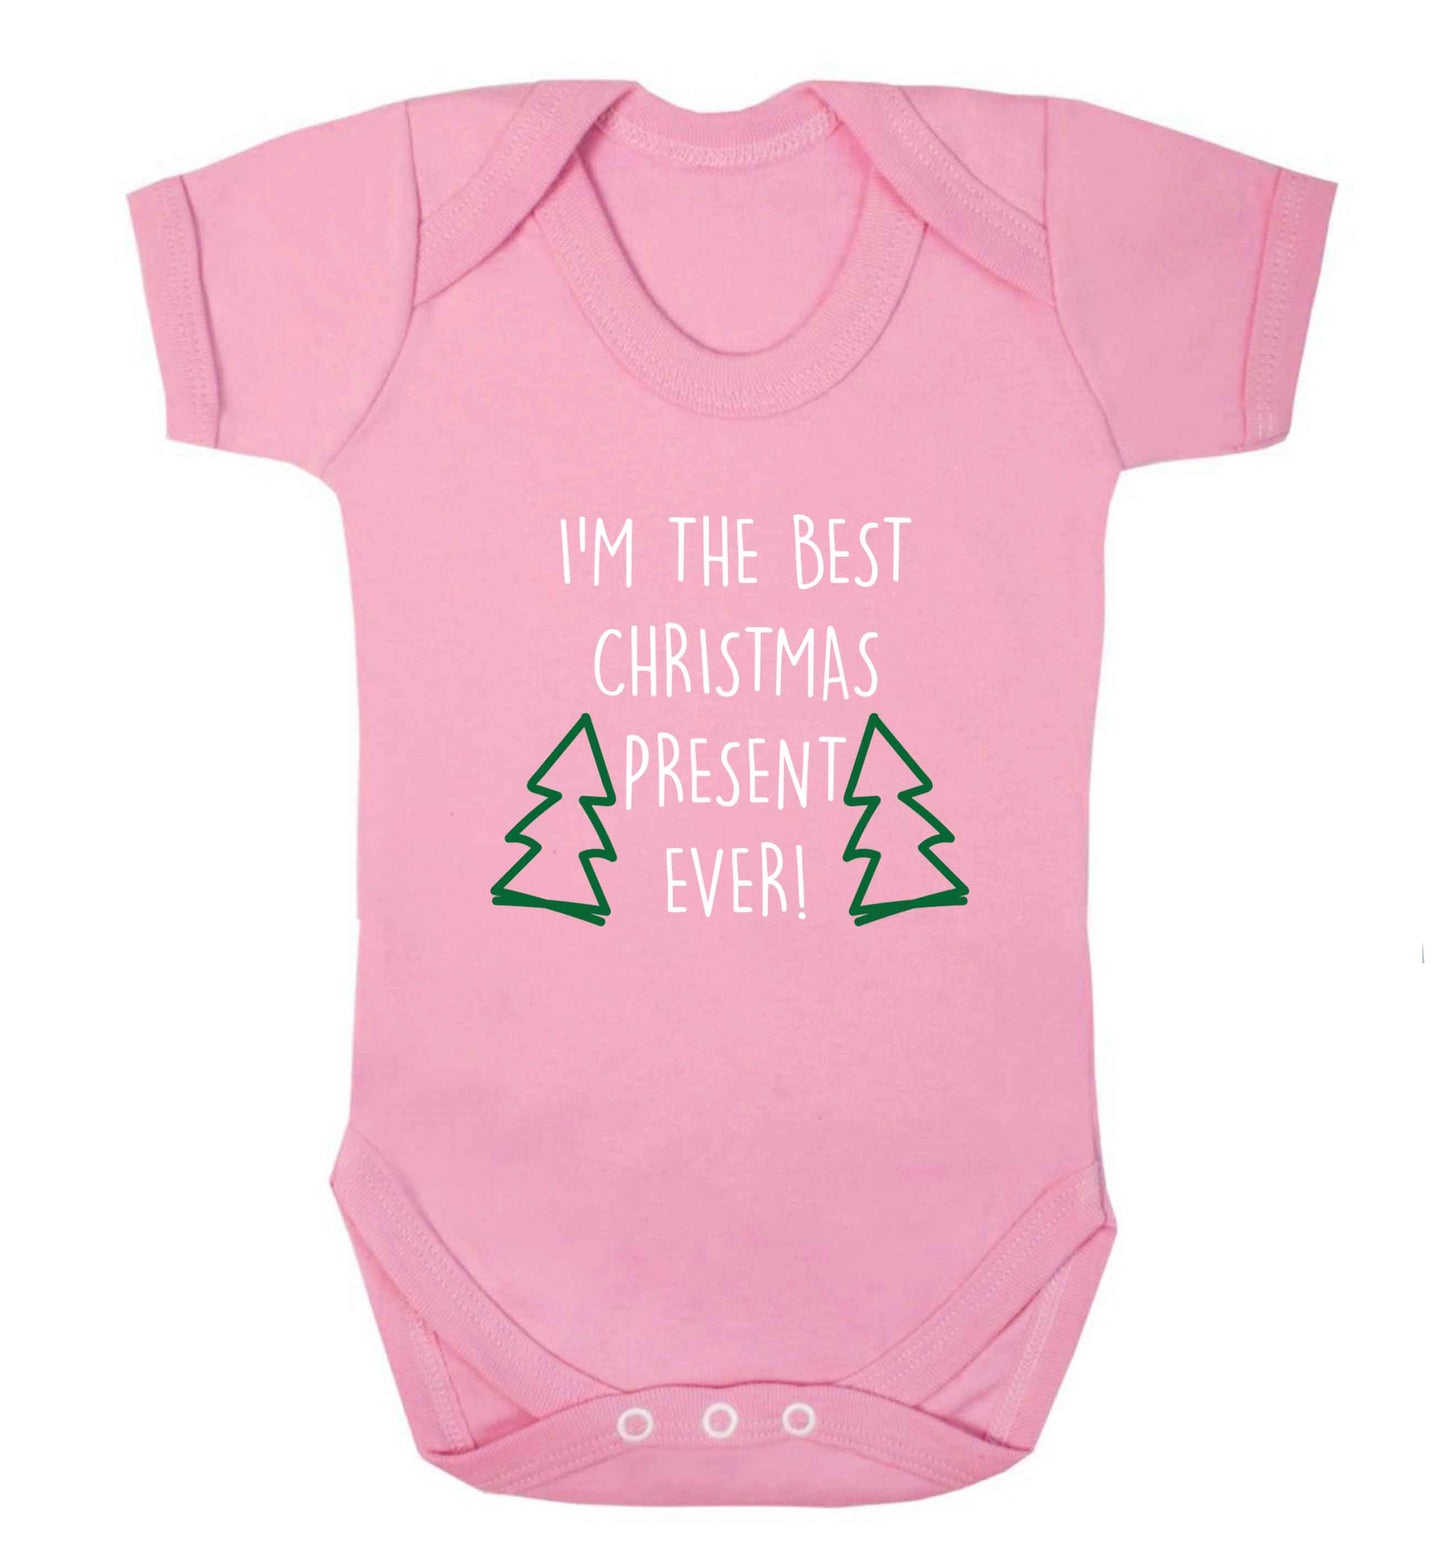 I'm the best Christmas present ever baby vest pale pink 18-24 months